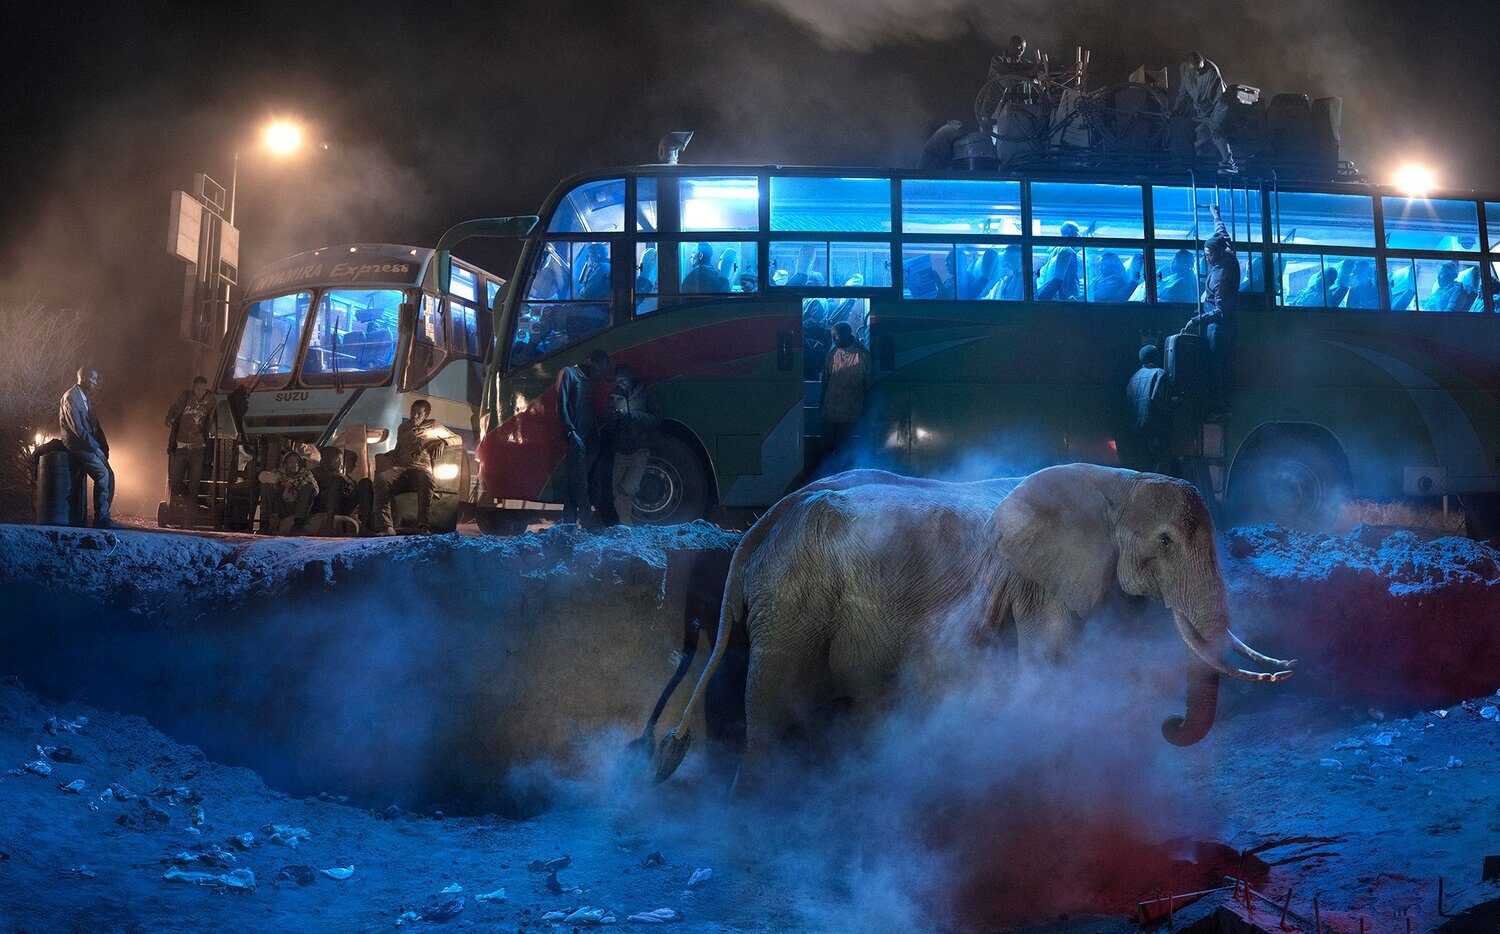 Image of bus station with elephant in the foreground and bus station and people in the background